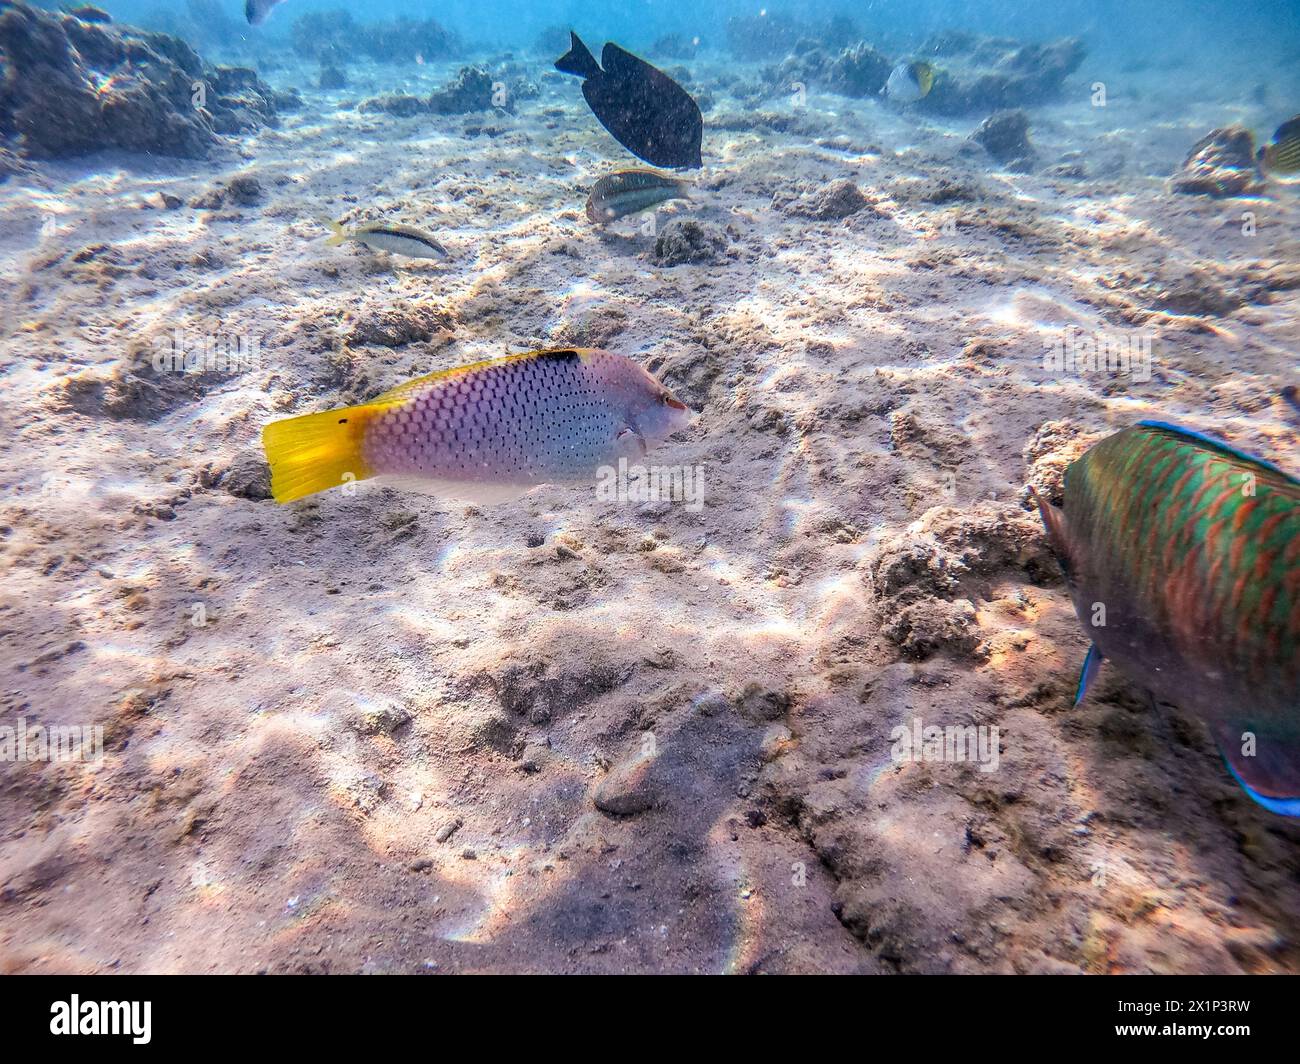 Tropical Checkerboard wrasse known as Halichoeres hortulanus underwater on sand sea bottom at the coral reef. Underwater life of reef with corals an Stock Photo